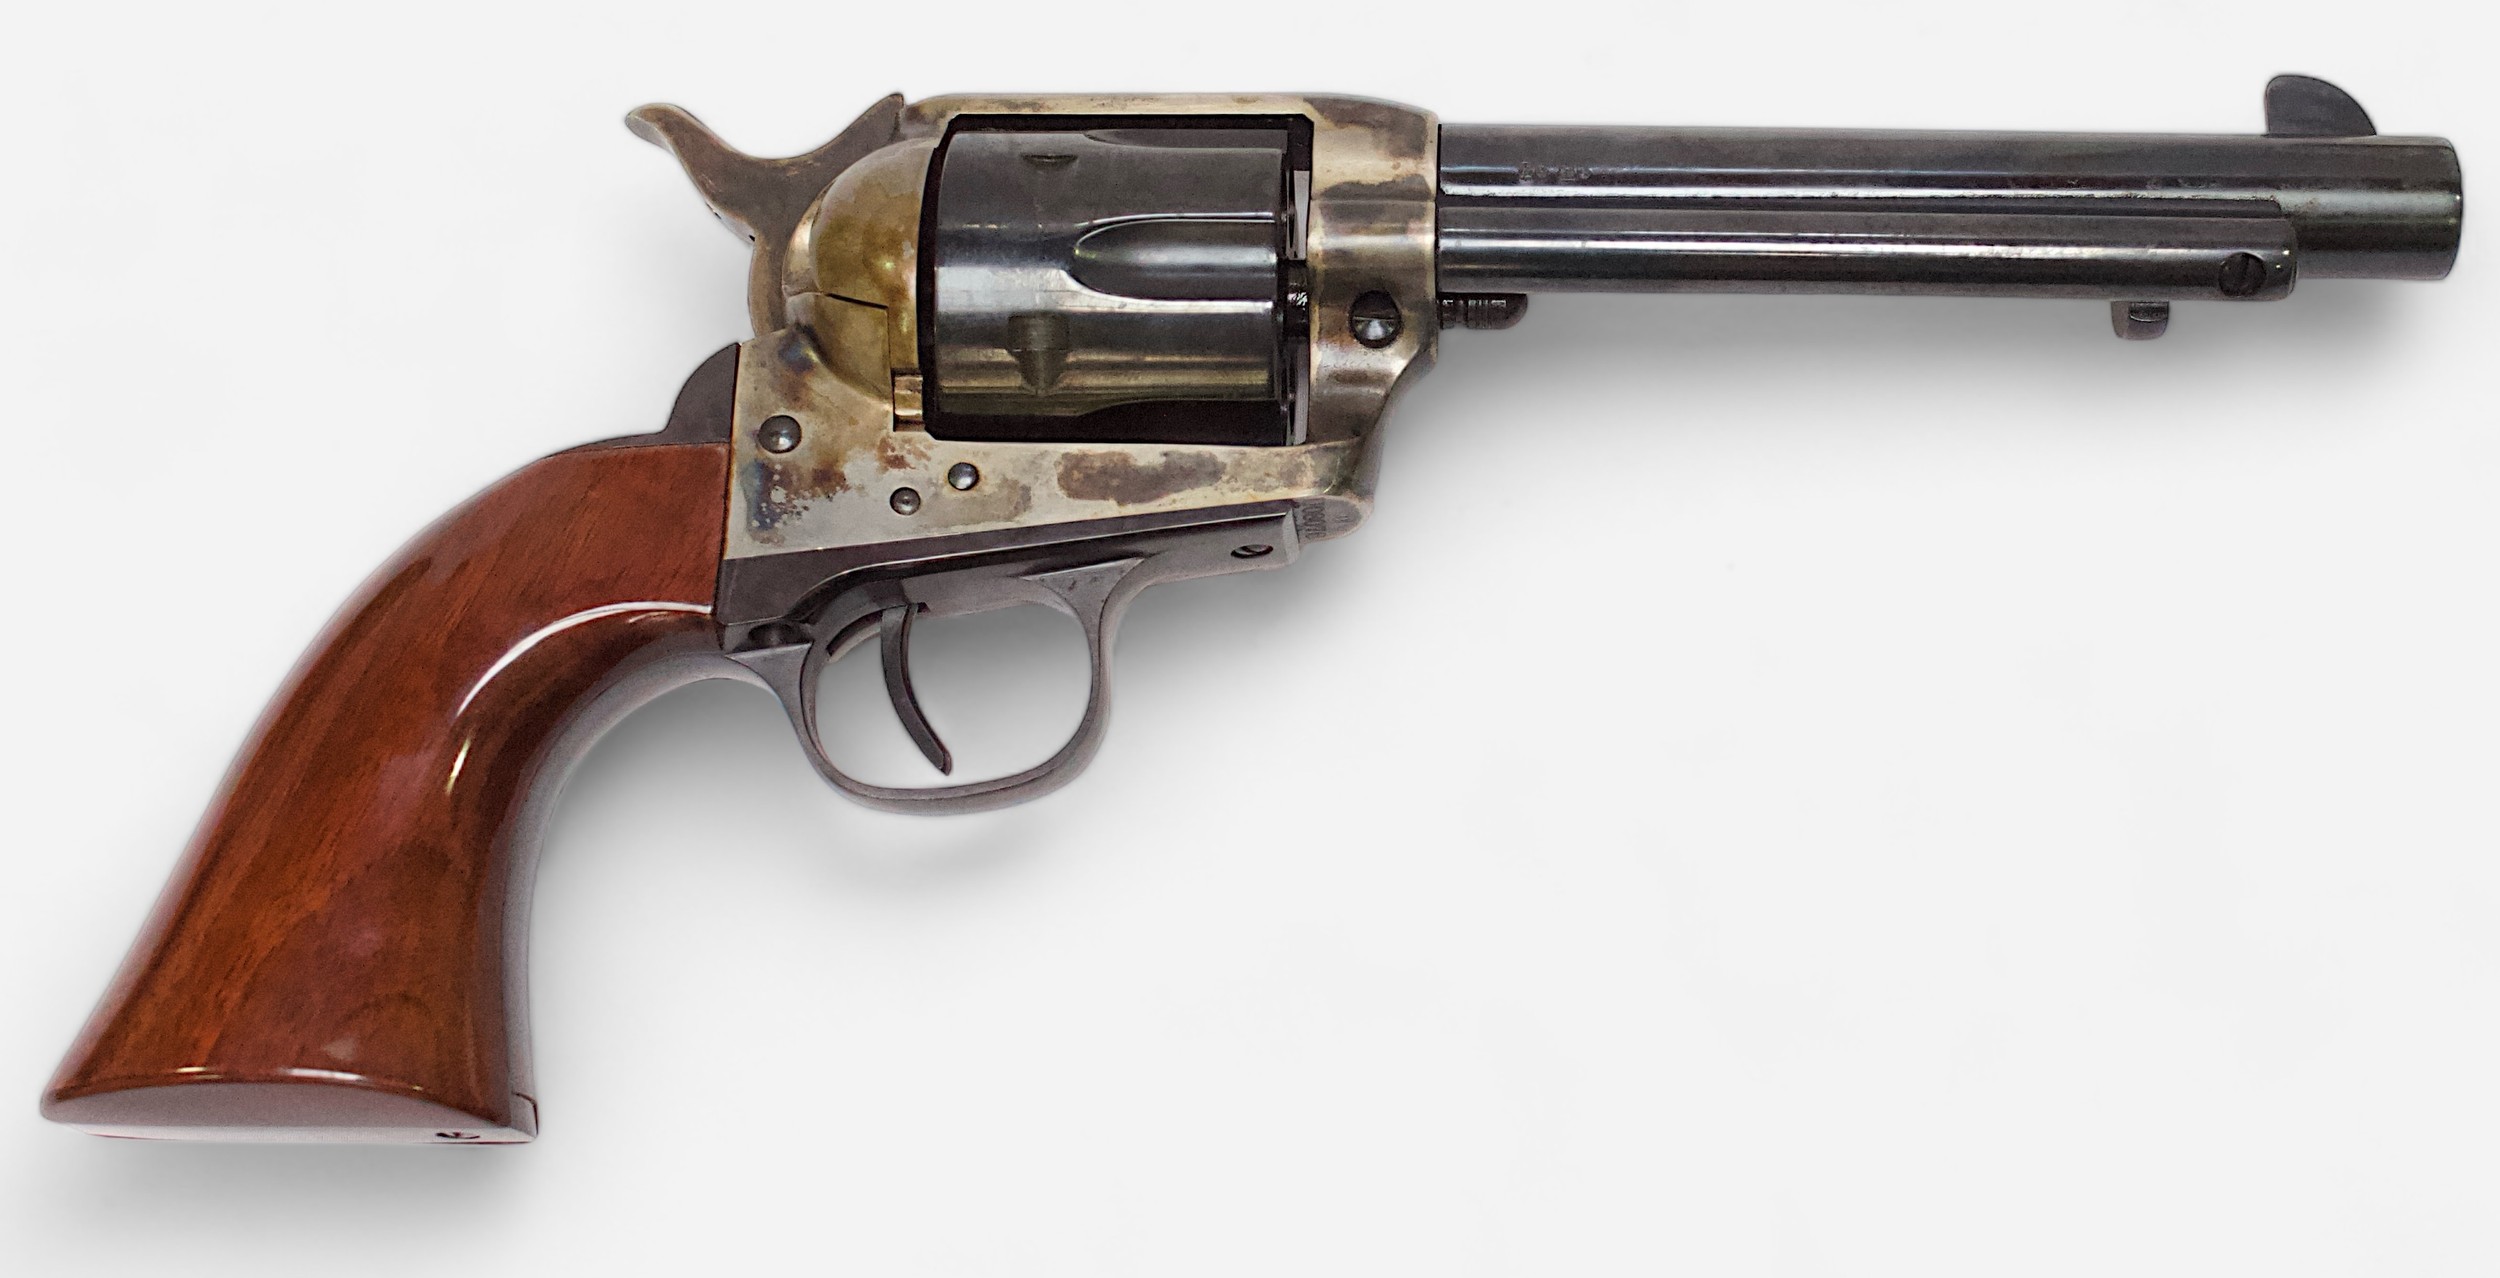 An Uberti Model 1830 Colt Peacemaker style 9mm blank firing six-shot single action revolver with - Image 2 of 4